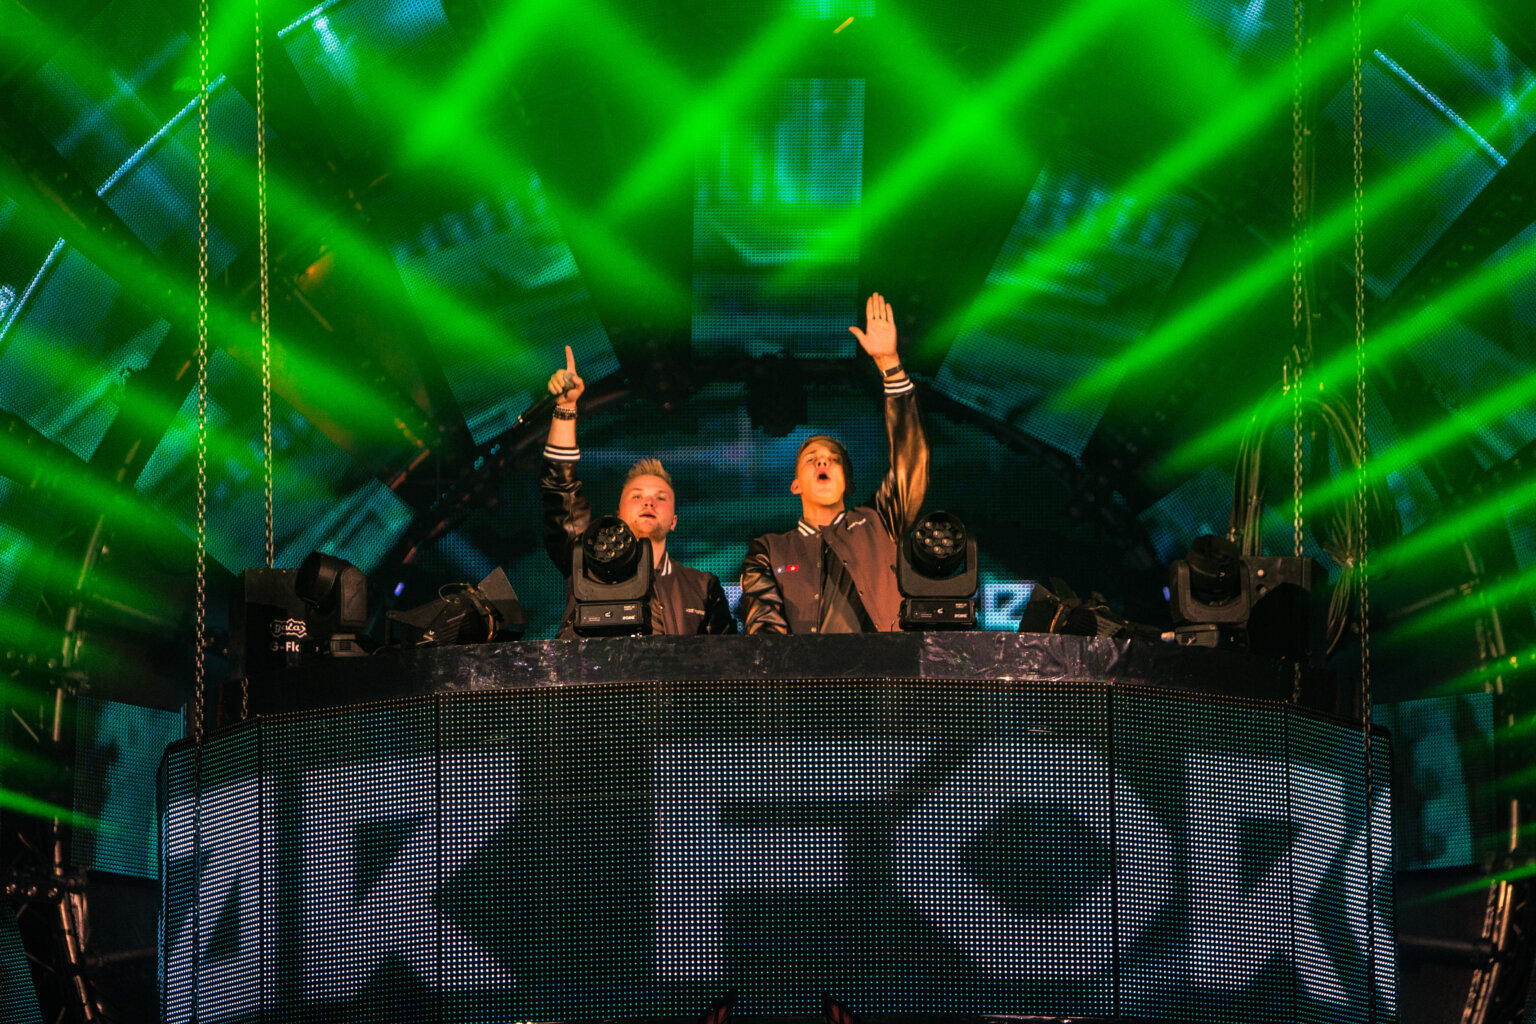 Warface & E-force reunite at Live For This: 10 years of Warface.